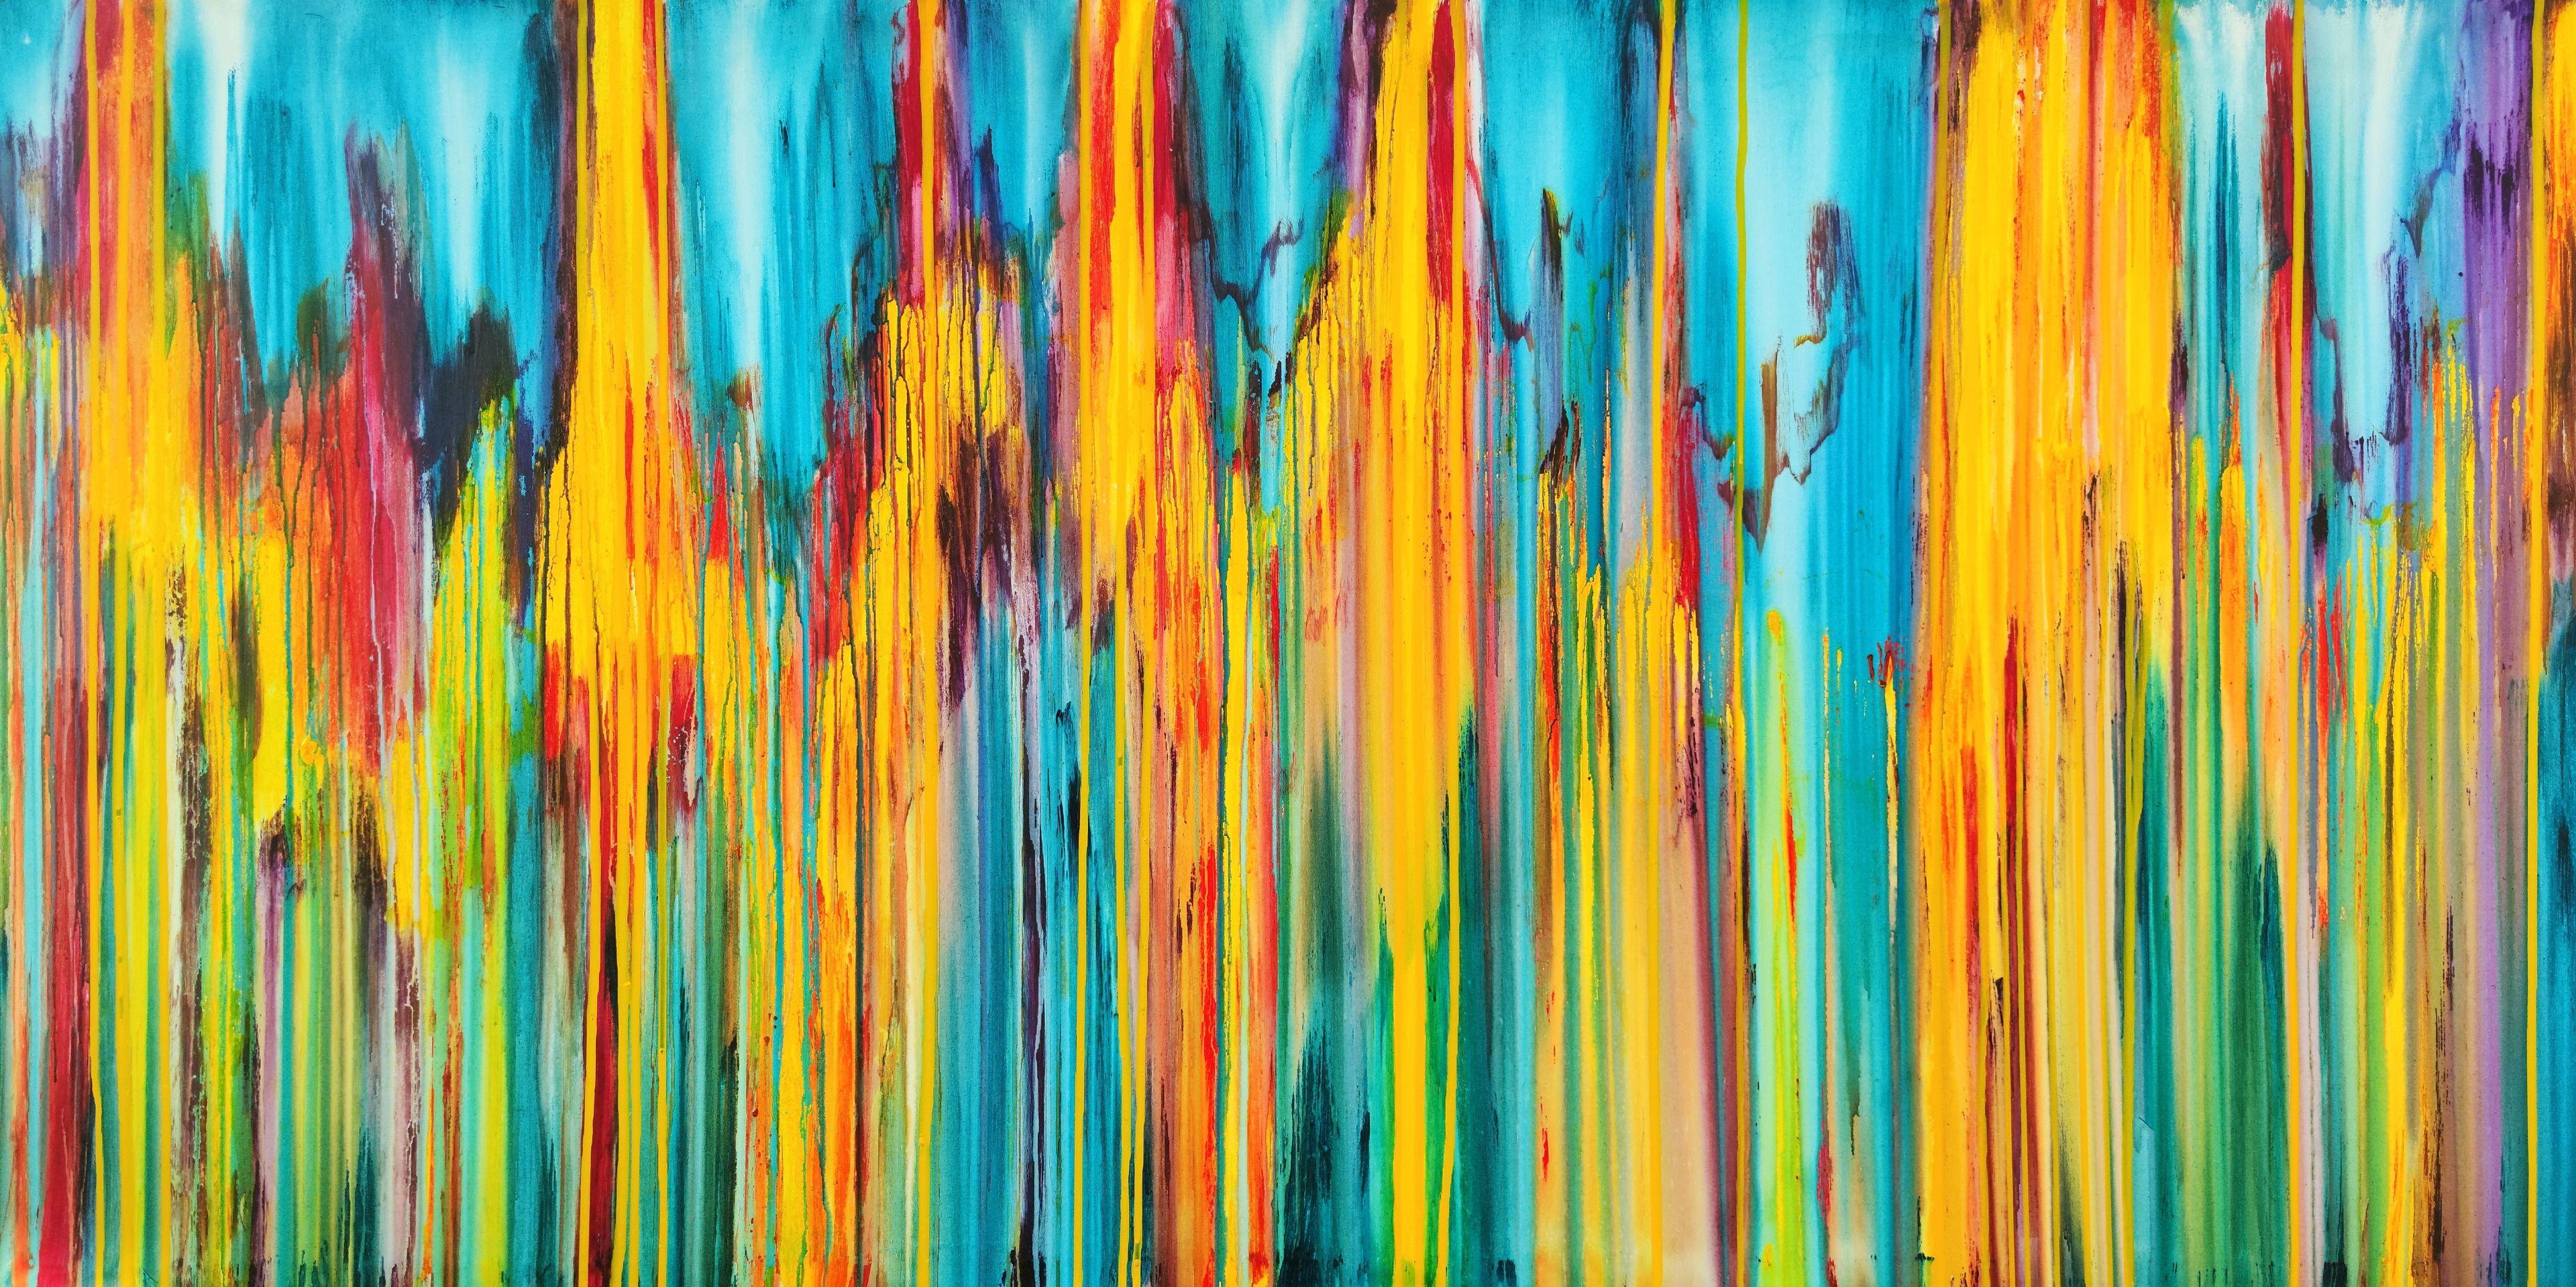 Carla Sá Fernandes Abstract Painting - The Emotional Creation #344, Painting, Acrylic on Canvas